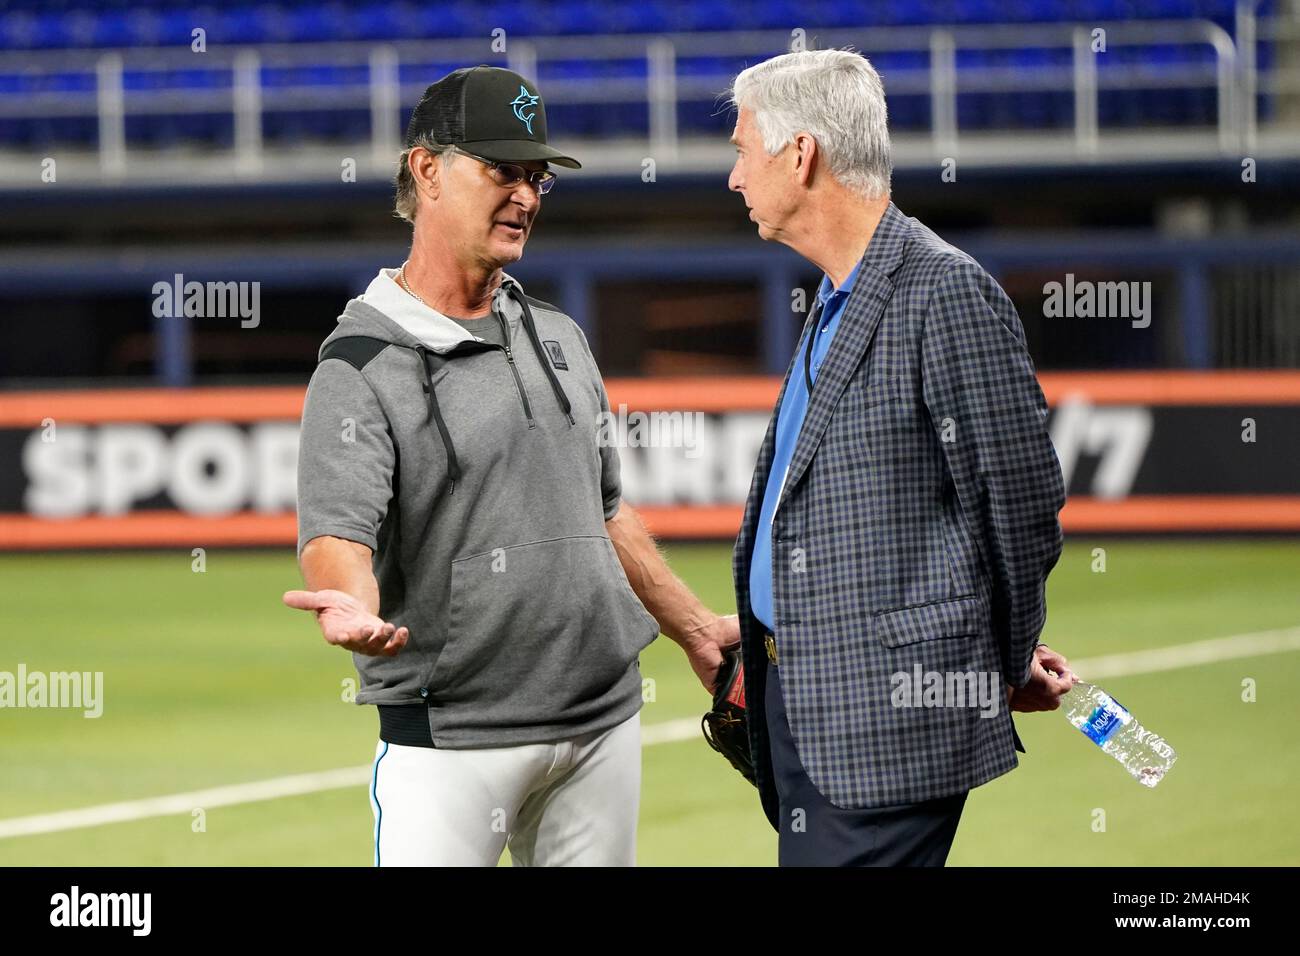 Miami Marlins manager Don Mattingly, left, talks with Miami